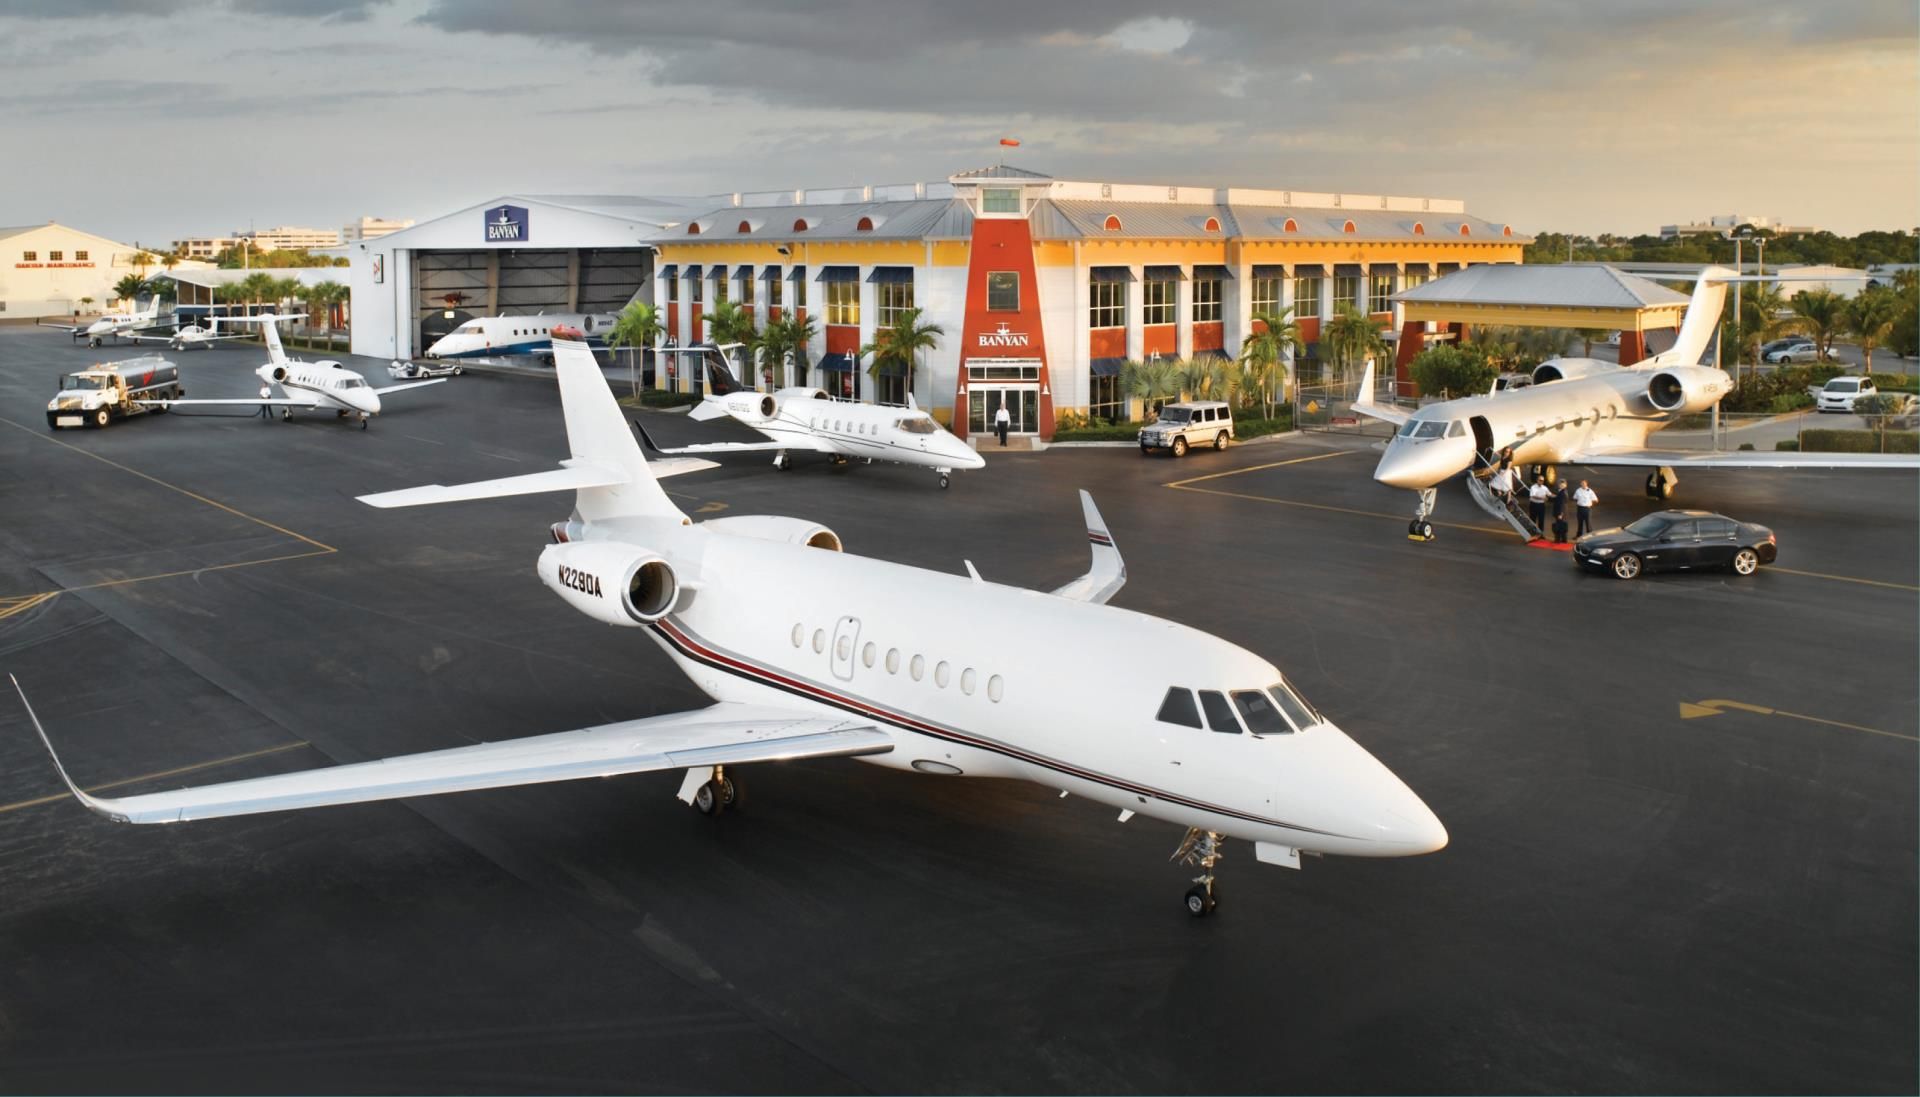 Many business jets parked and taxiing at Fort Lauderdale Executive Airport.